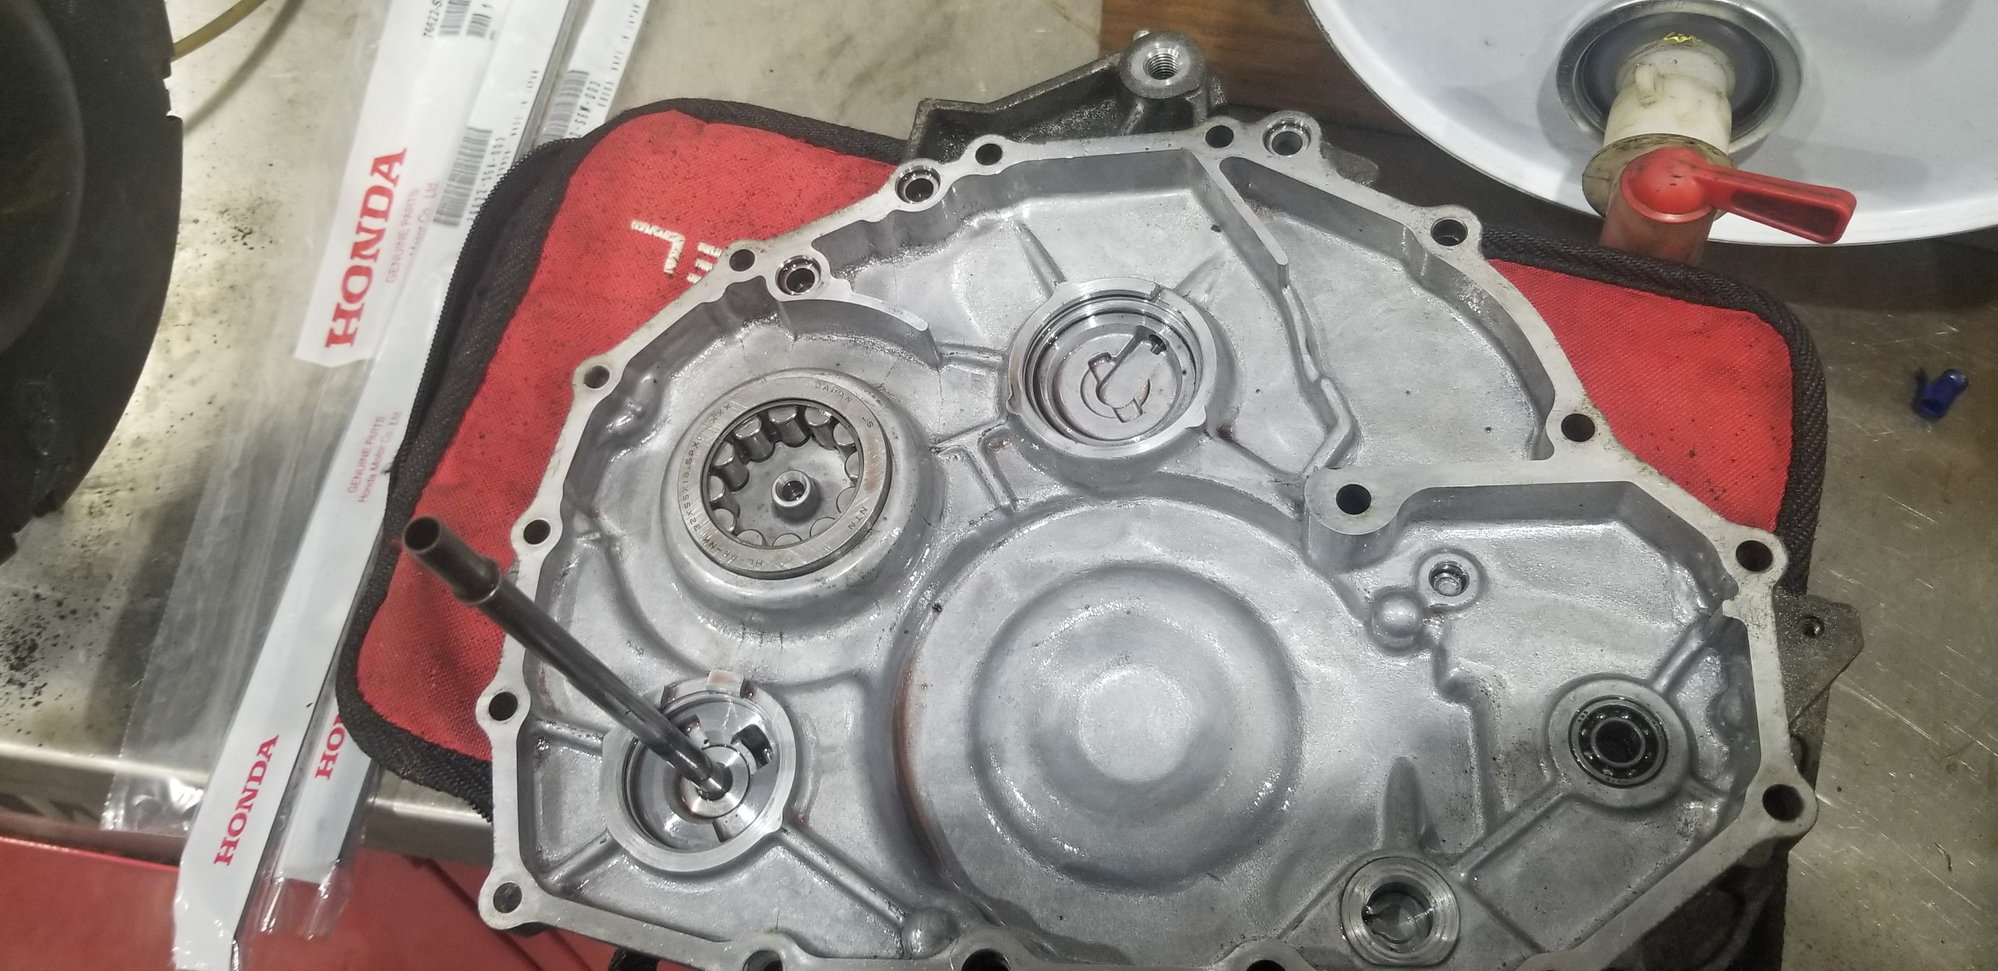 Troubleshooting Honda CRV Transfer Case Noise: Causes and Solutions